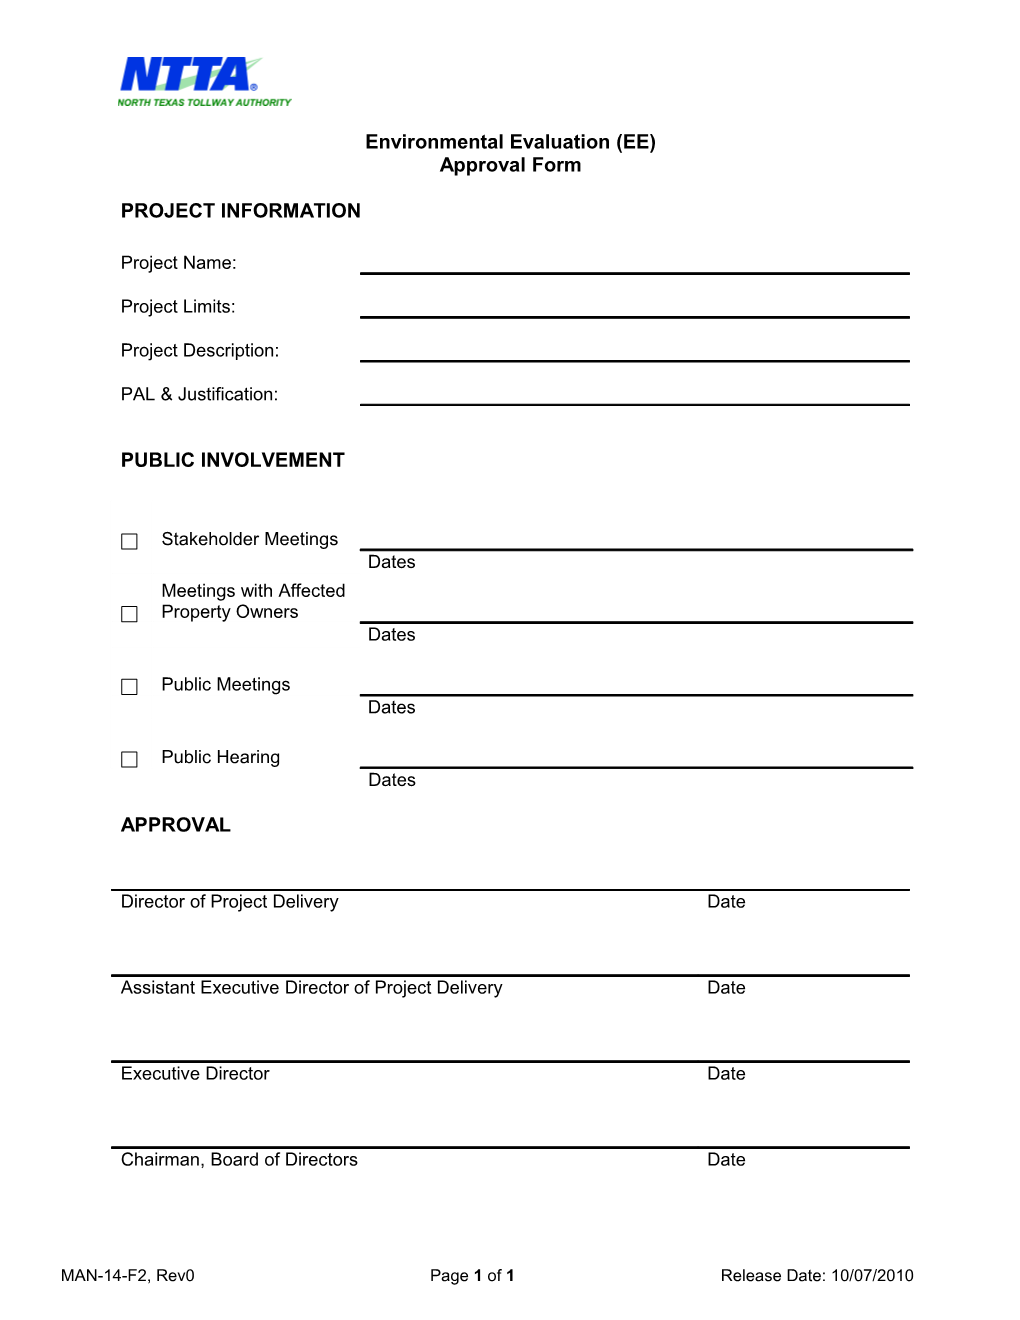 EE Approval Form